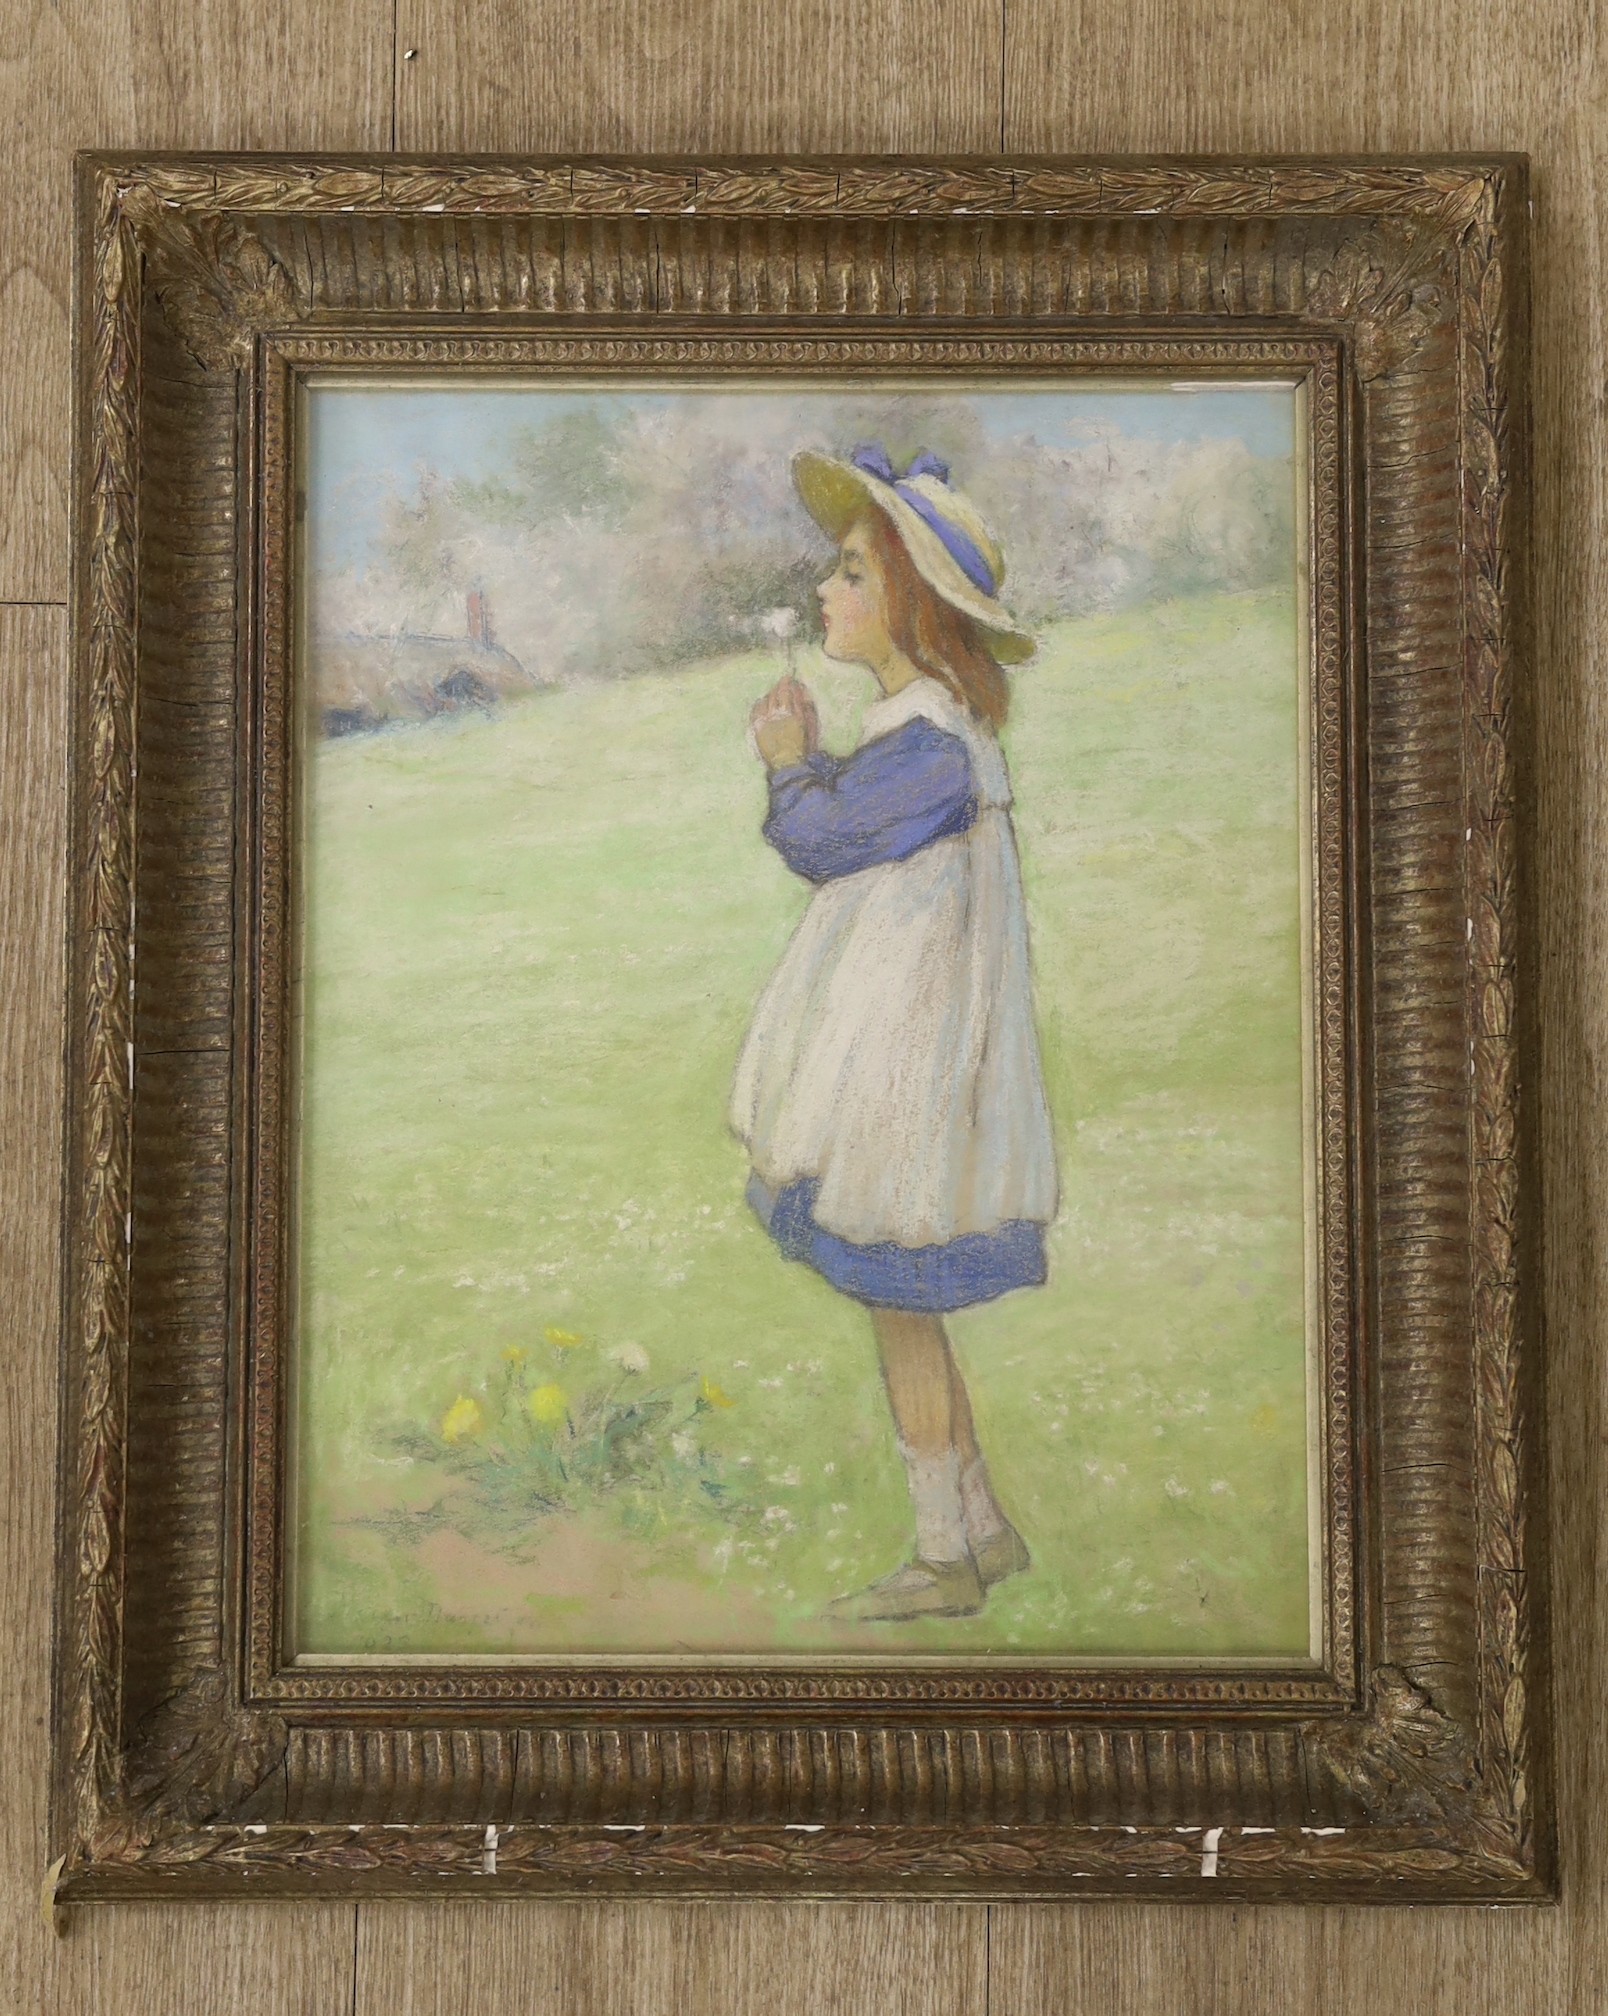 Margetson, pastel, Girl blowing a dandelion, signed and dated 1923, 37 x 29cm - Image 2 of 3